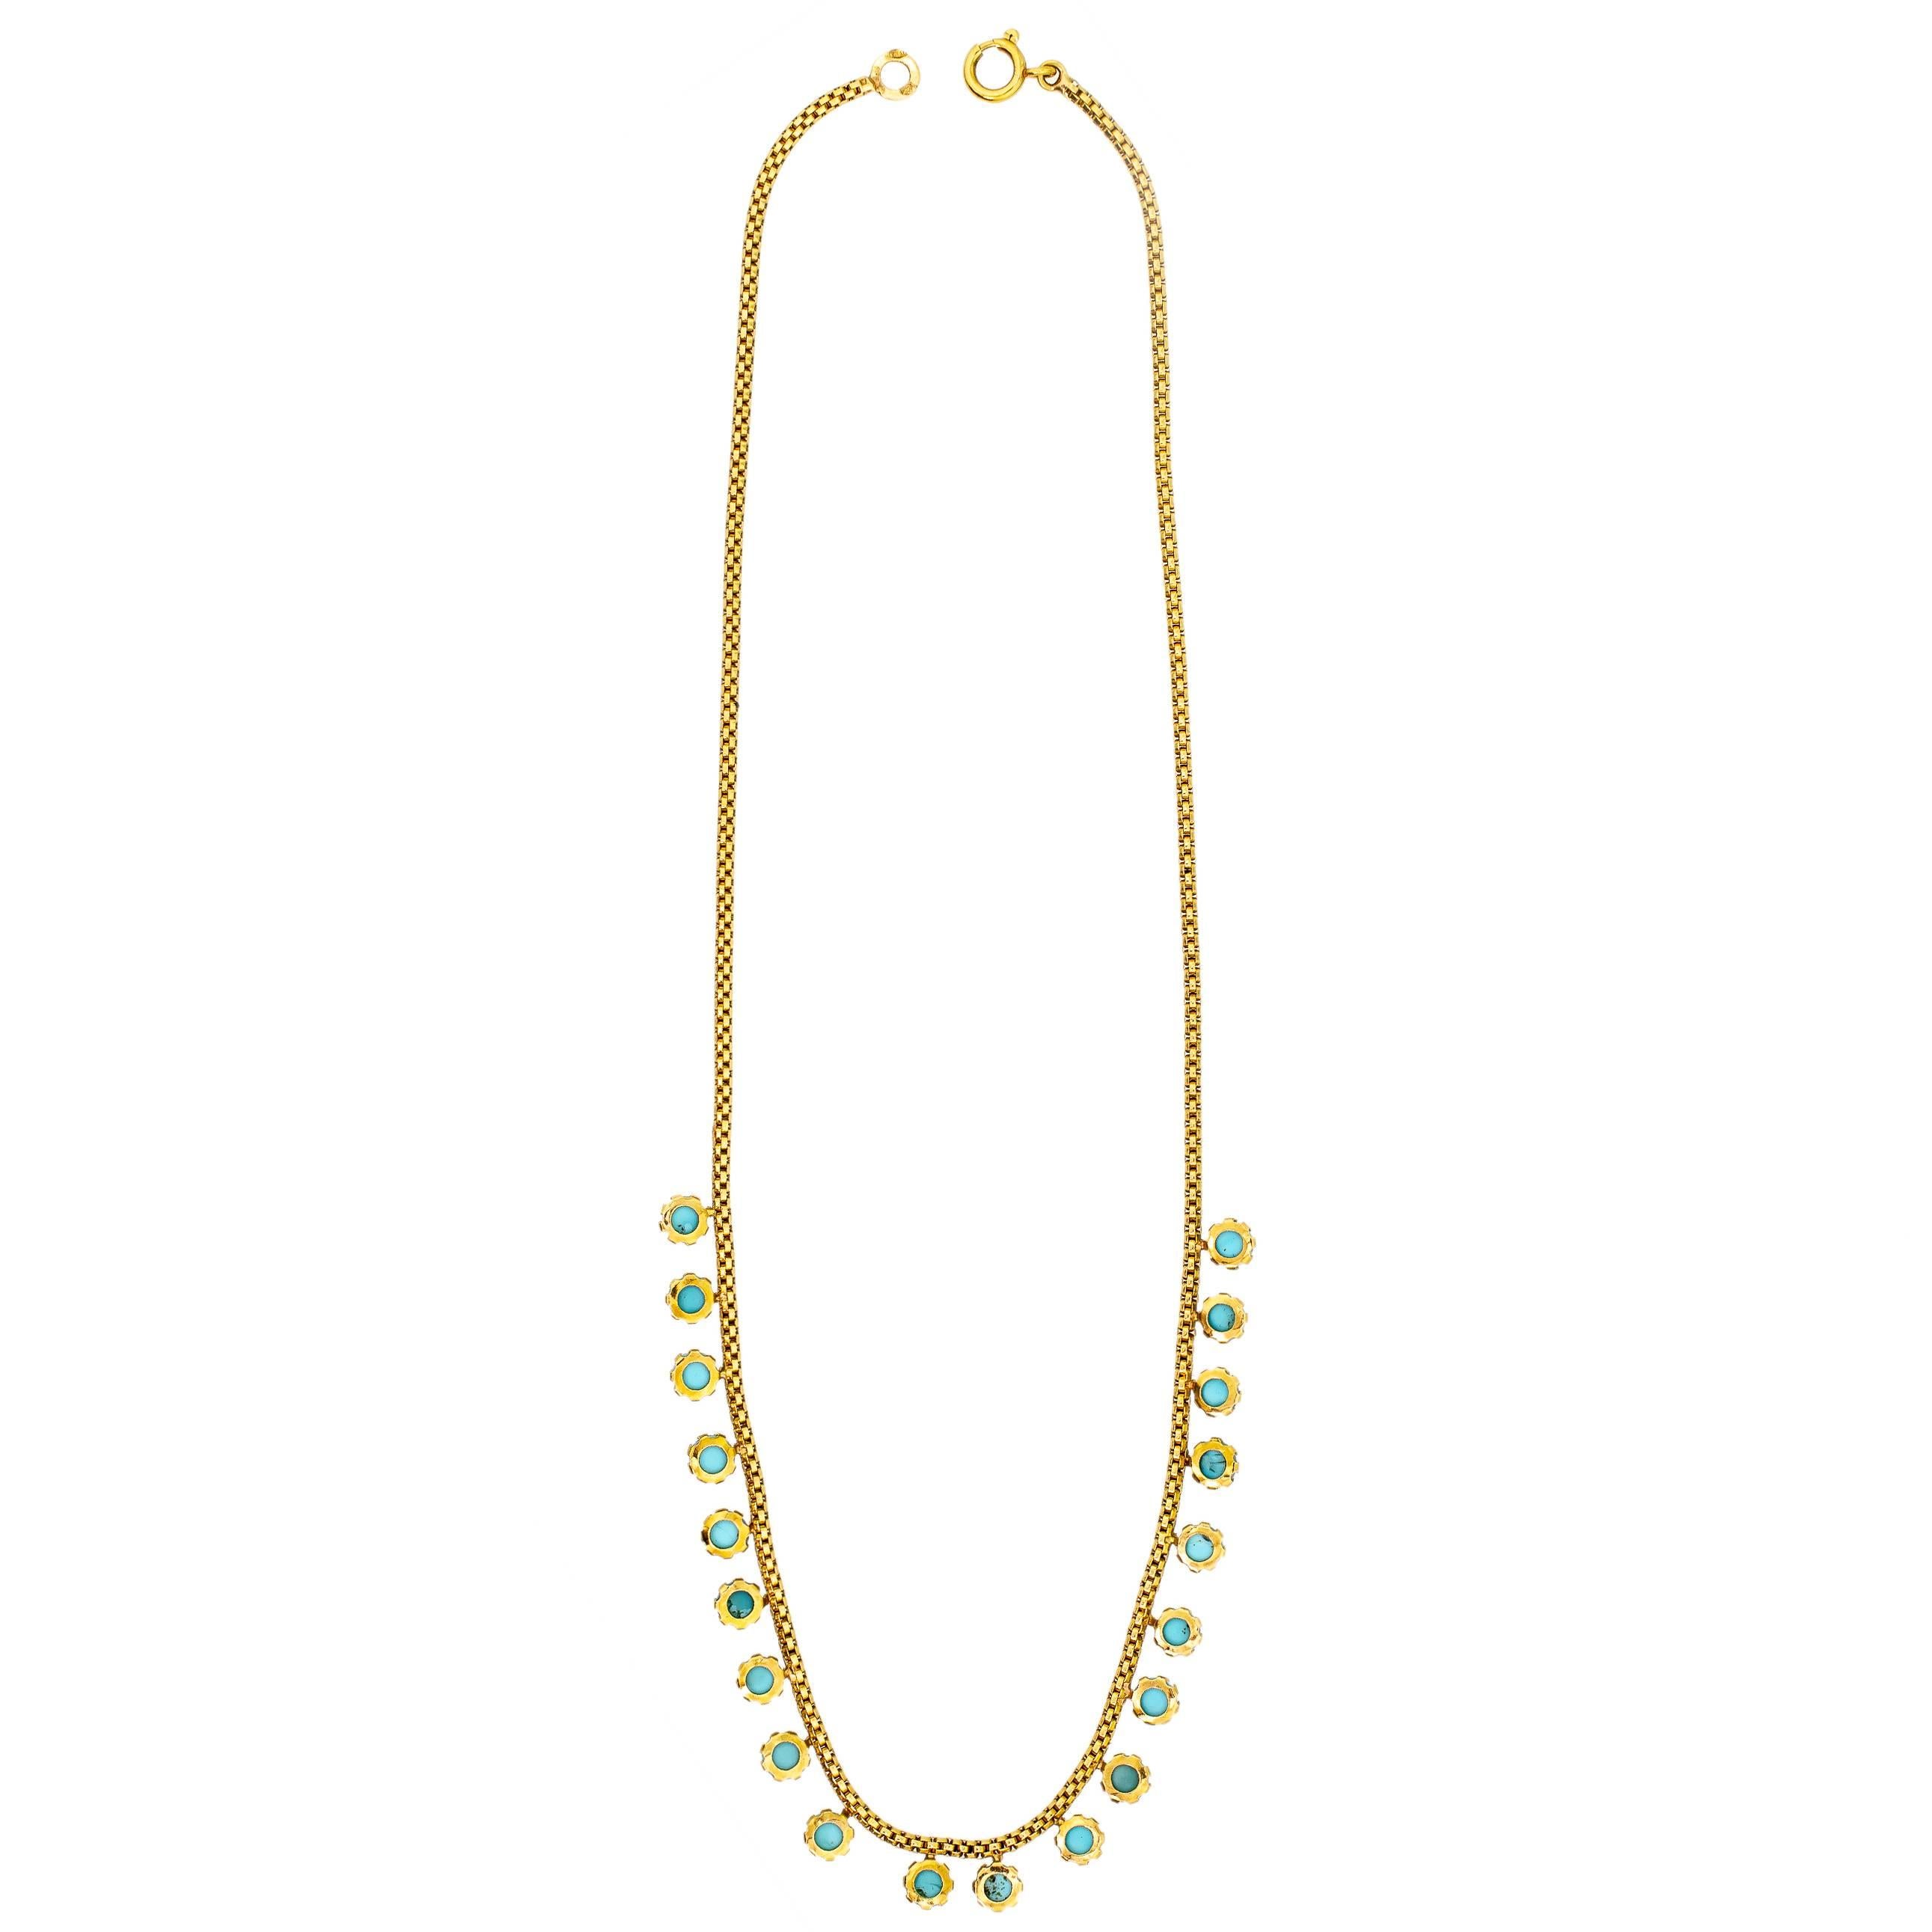 Wonderful Turn of the Century Antique Turquoise and 18 Karat Gold Necklace 1